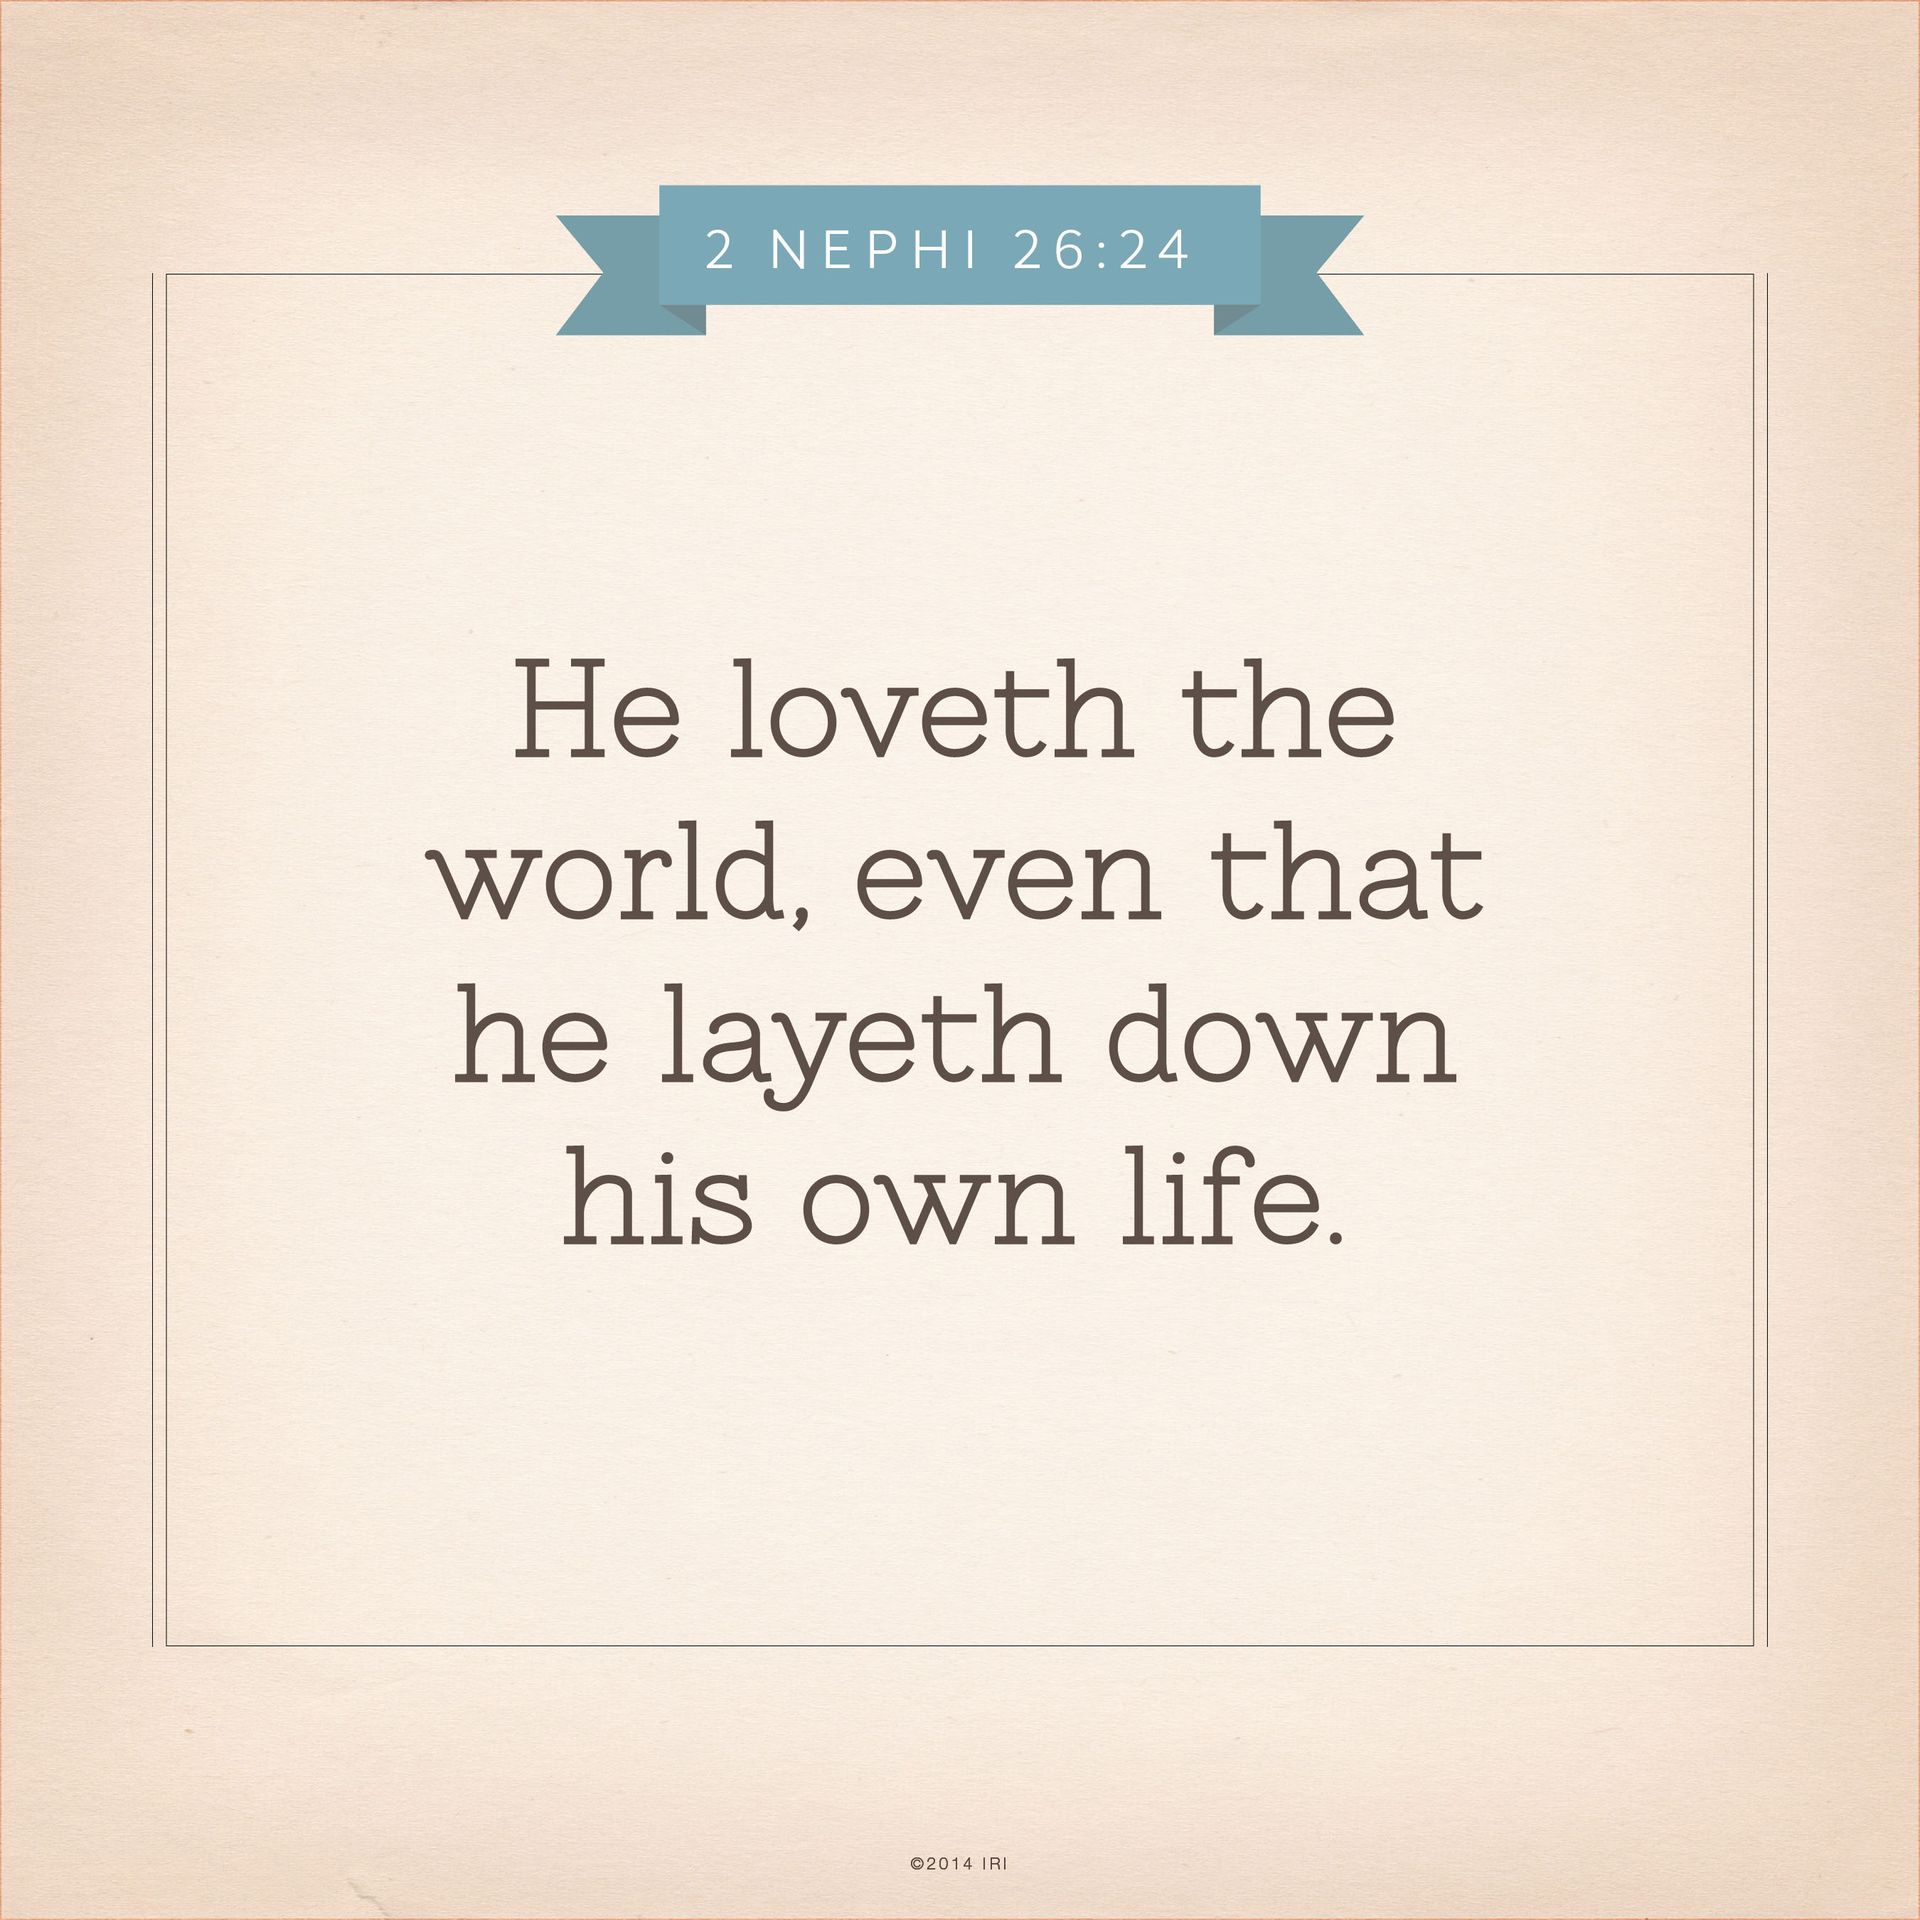 “He loveth the world, even that he layeth down his own life.”—2 Nephi 26:24 © undefined ipCode 1.